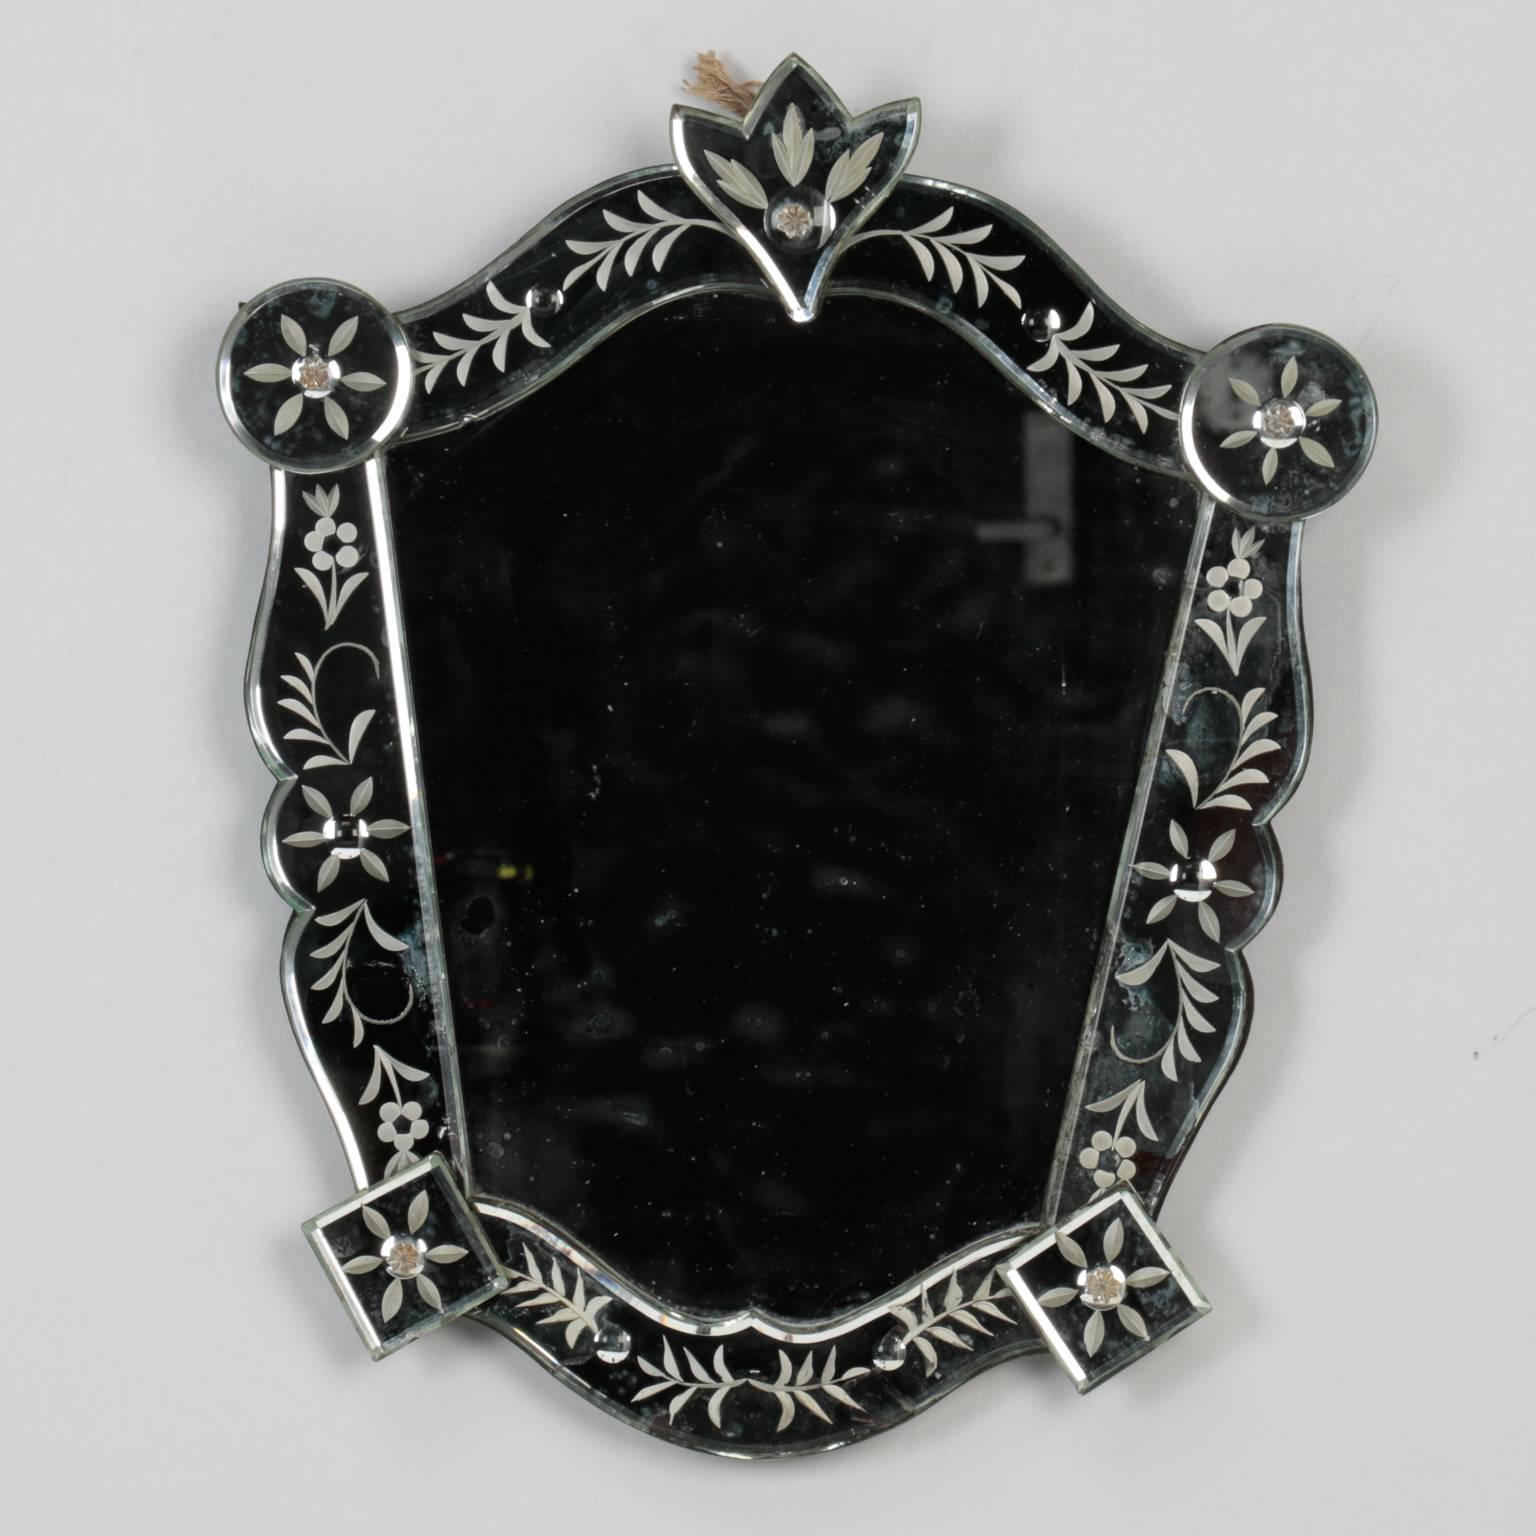 Venetian mirror in shield form with etched frame. Versatile size at just under 20” tall, circa 1940s.
 